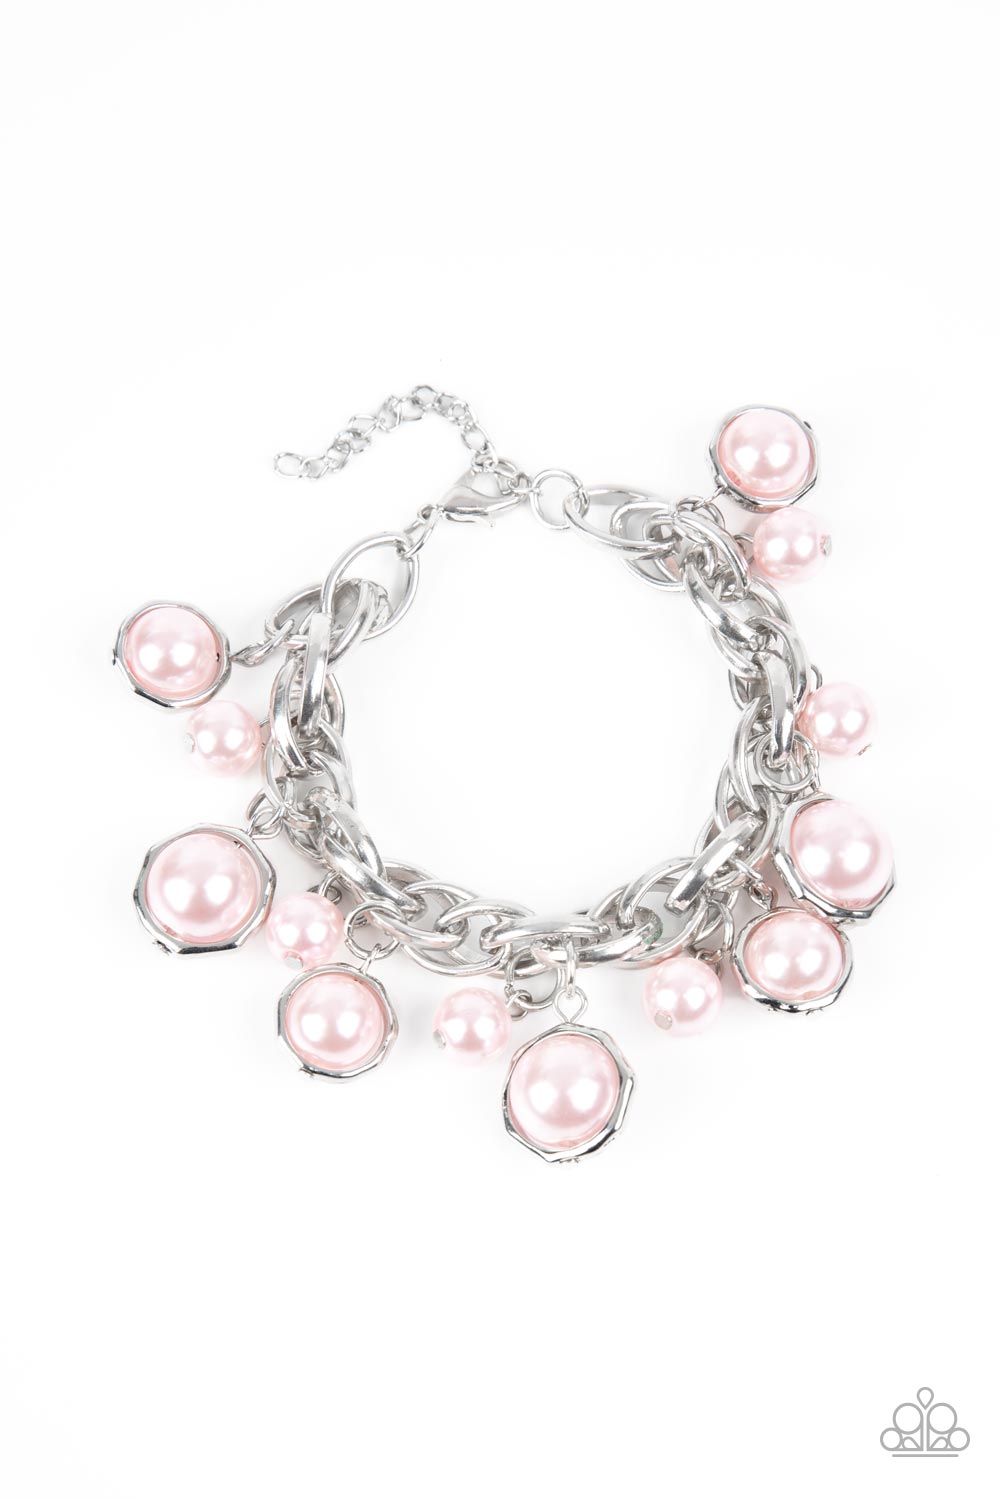 Orbiting Opulence - Pink Pearl Bracelets luscious pink pearls and solitaire pearls that are threaded along a rod inside imperfect silver rings swing from a chunky double-linked silver chain around the wrist, creating a dramatic fringe. Features an adjustable clasp closure.  Sold as one individual bracelet.  Get The Complete Look! Necklace: "Revolving Refinement - Pink" (Sold Separately)